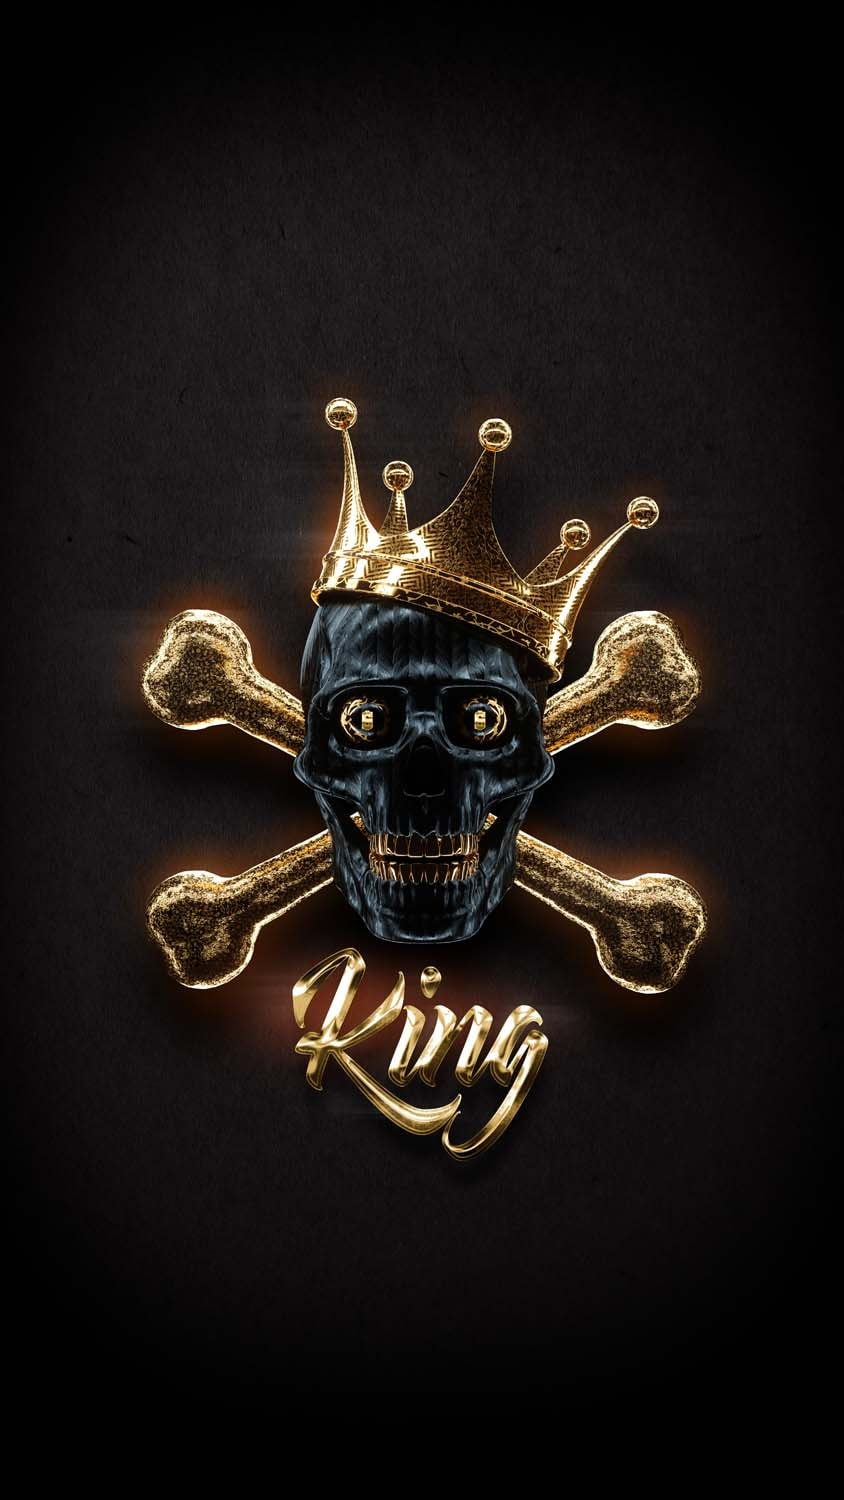 King Gold IPhone Wallpaper HD  IPhone Wallpapers